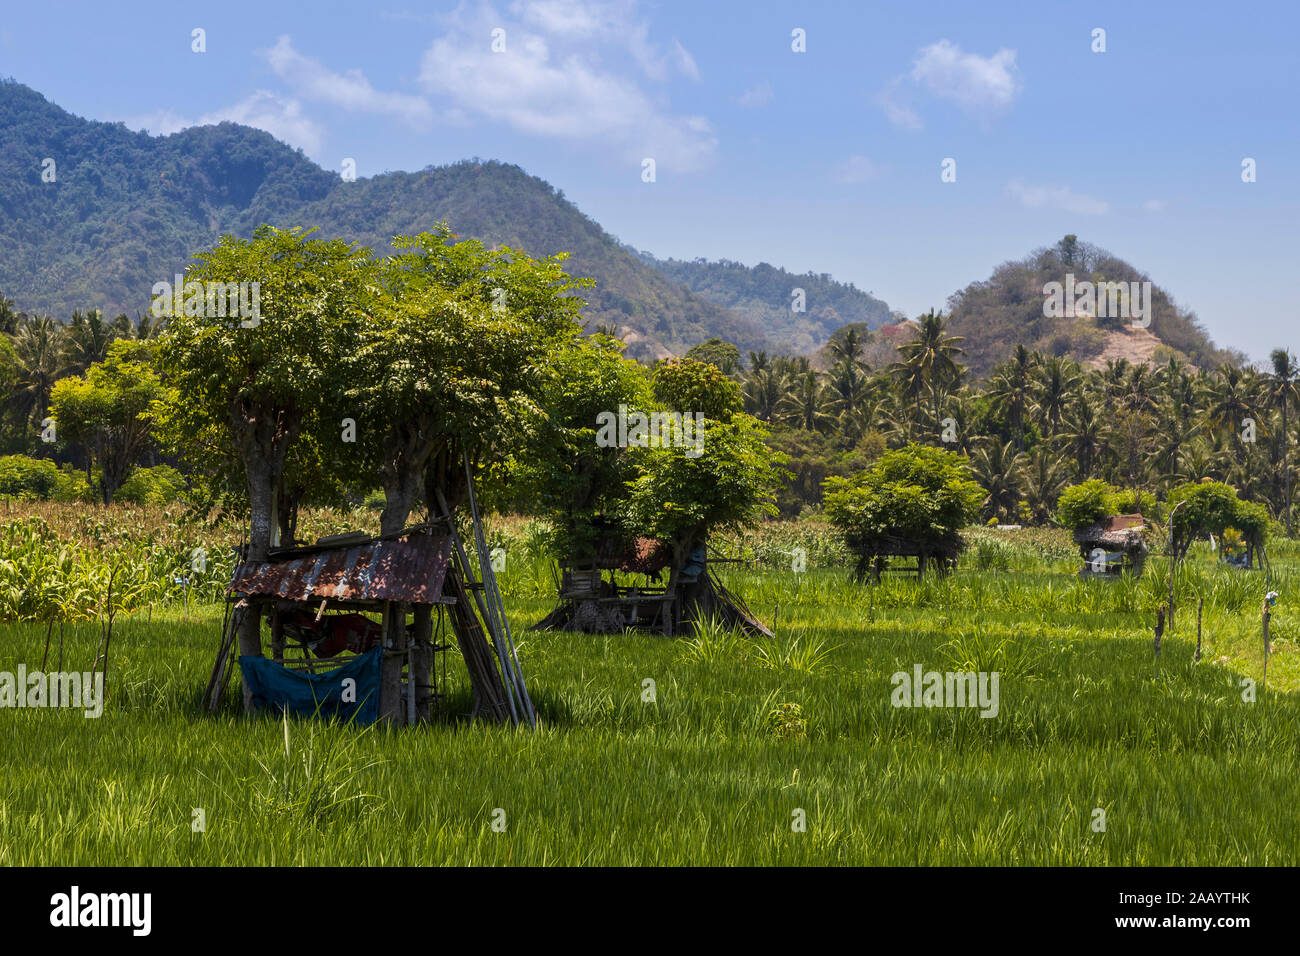 Agricultural field with huts, Candidasa or Candi Dasa, Eastern Bali, Bali, Indonesia, Southeast Asia, Asia Stock Photo